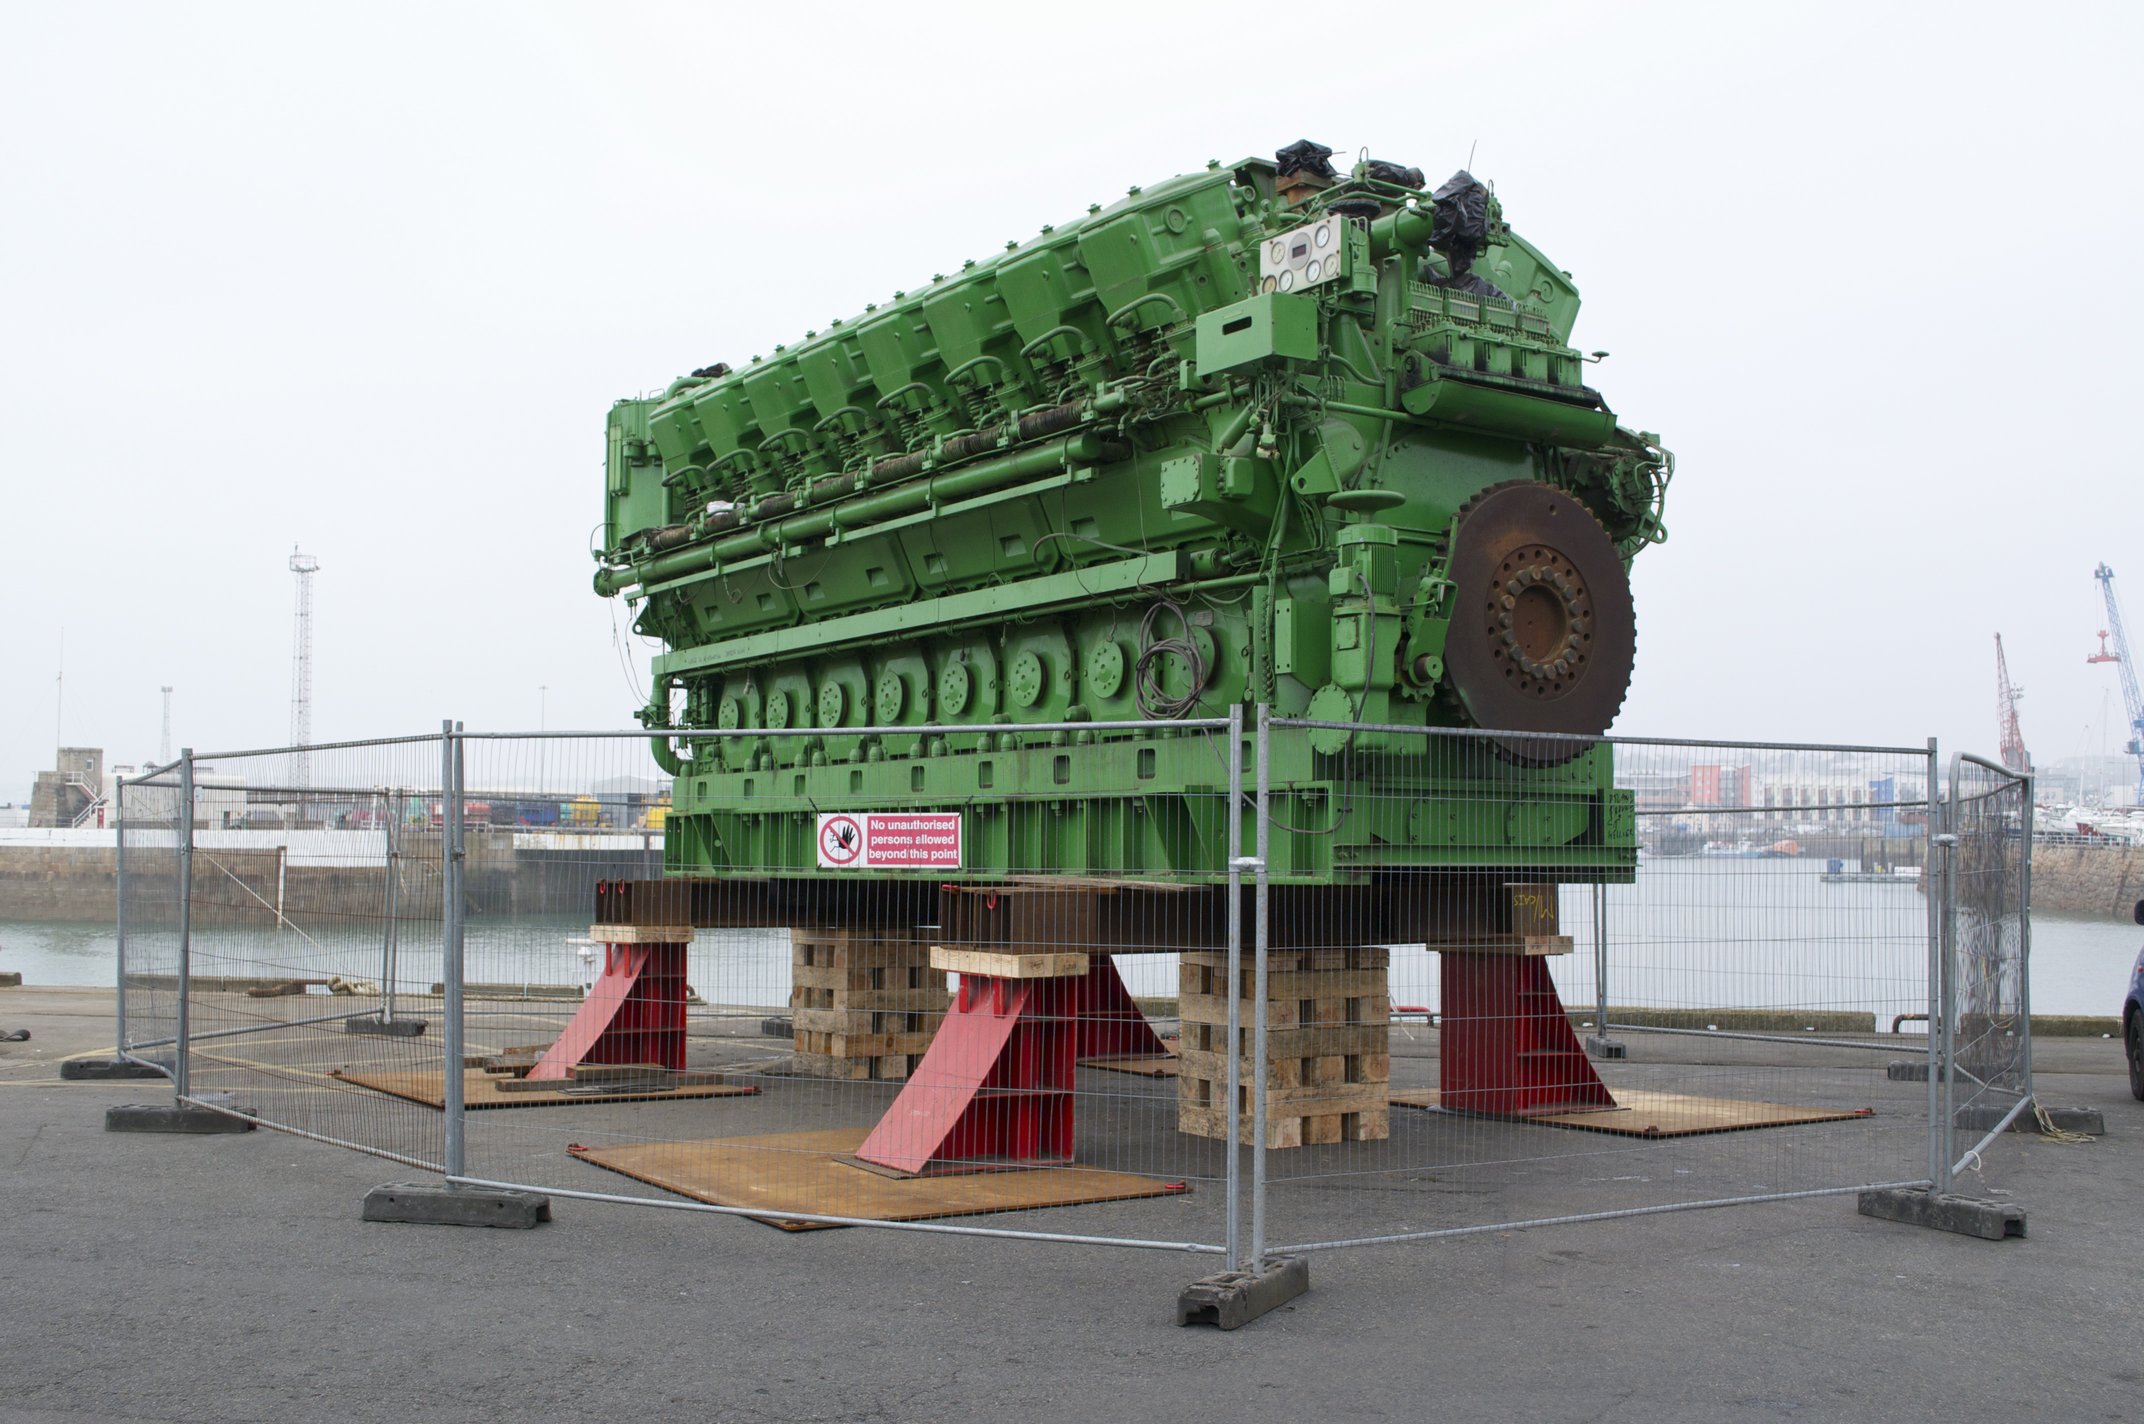 One of the two Sulzer Diesel Generators destined for La Collete sits on the docks in St Helier.